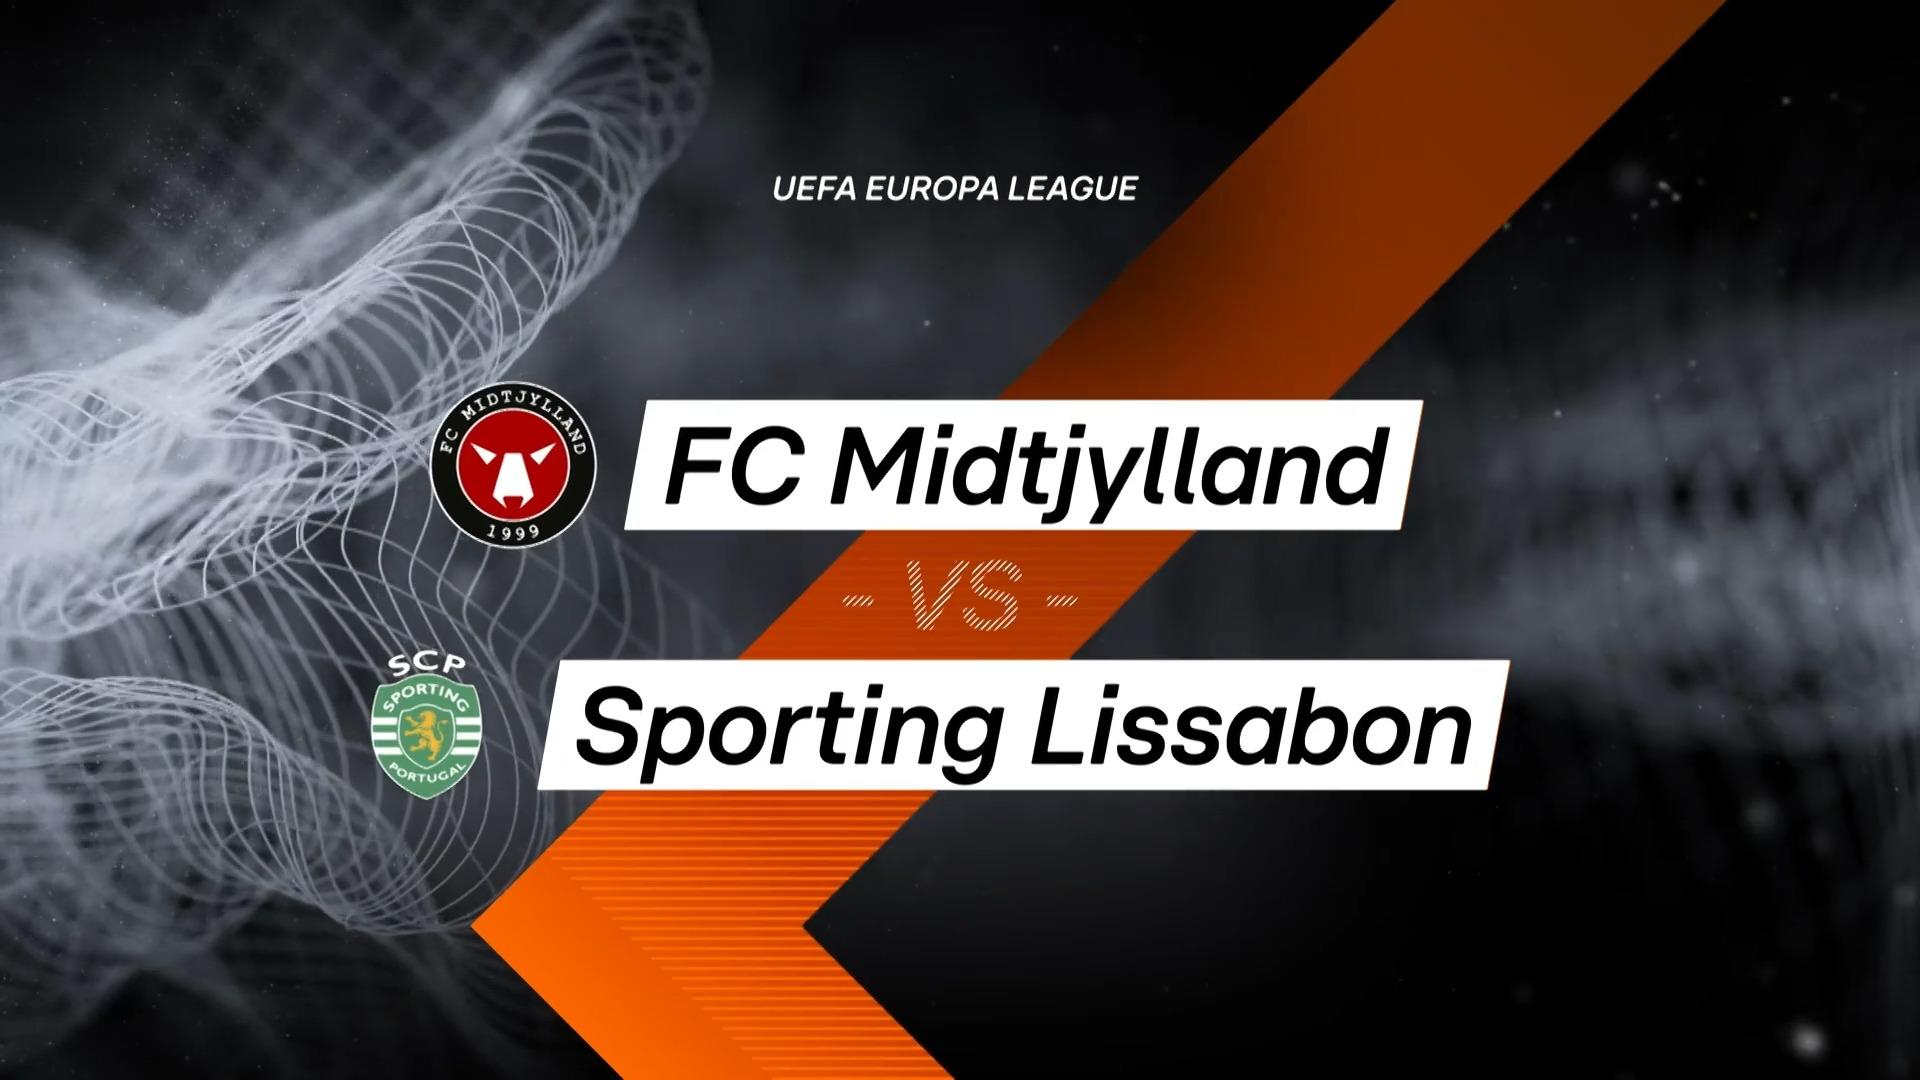 The highlights FCM against Sporting in the summary